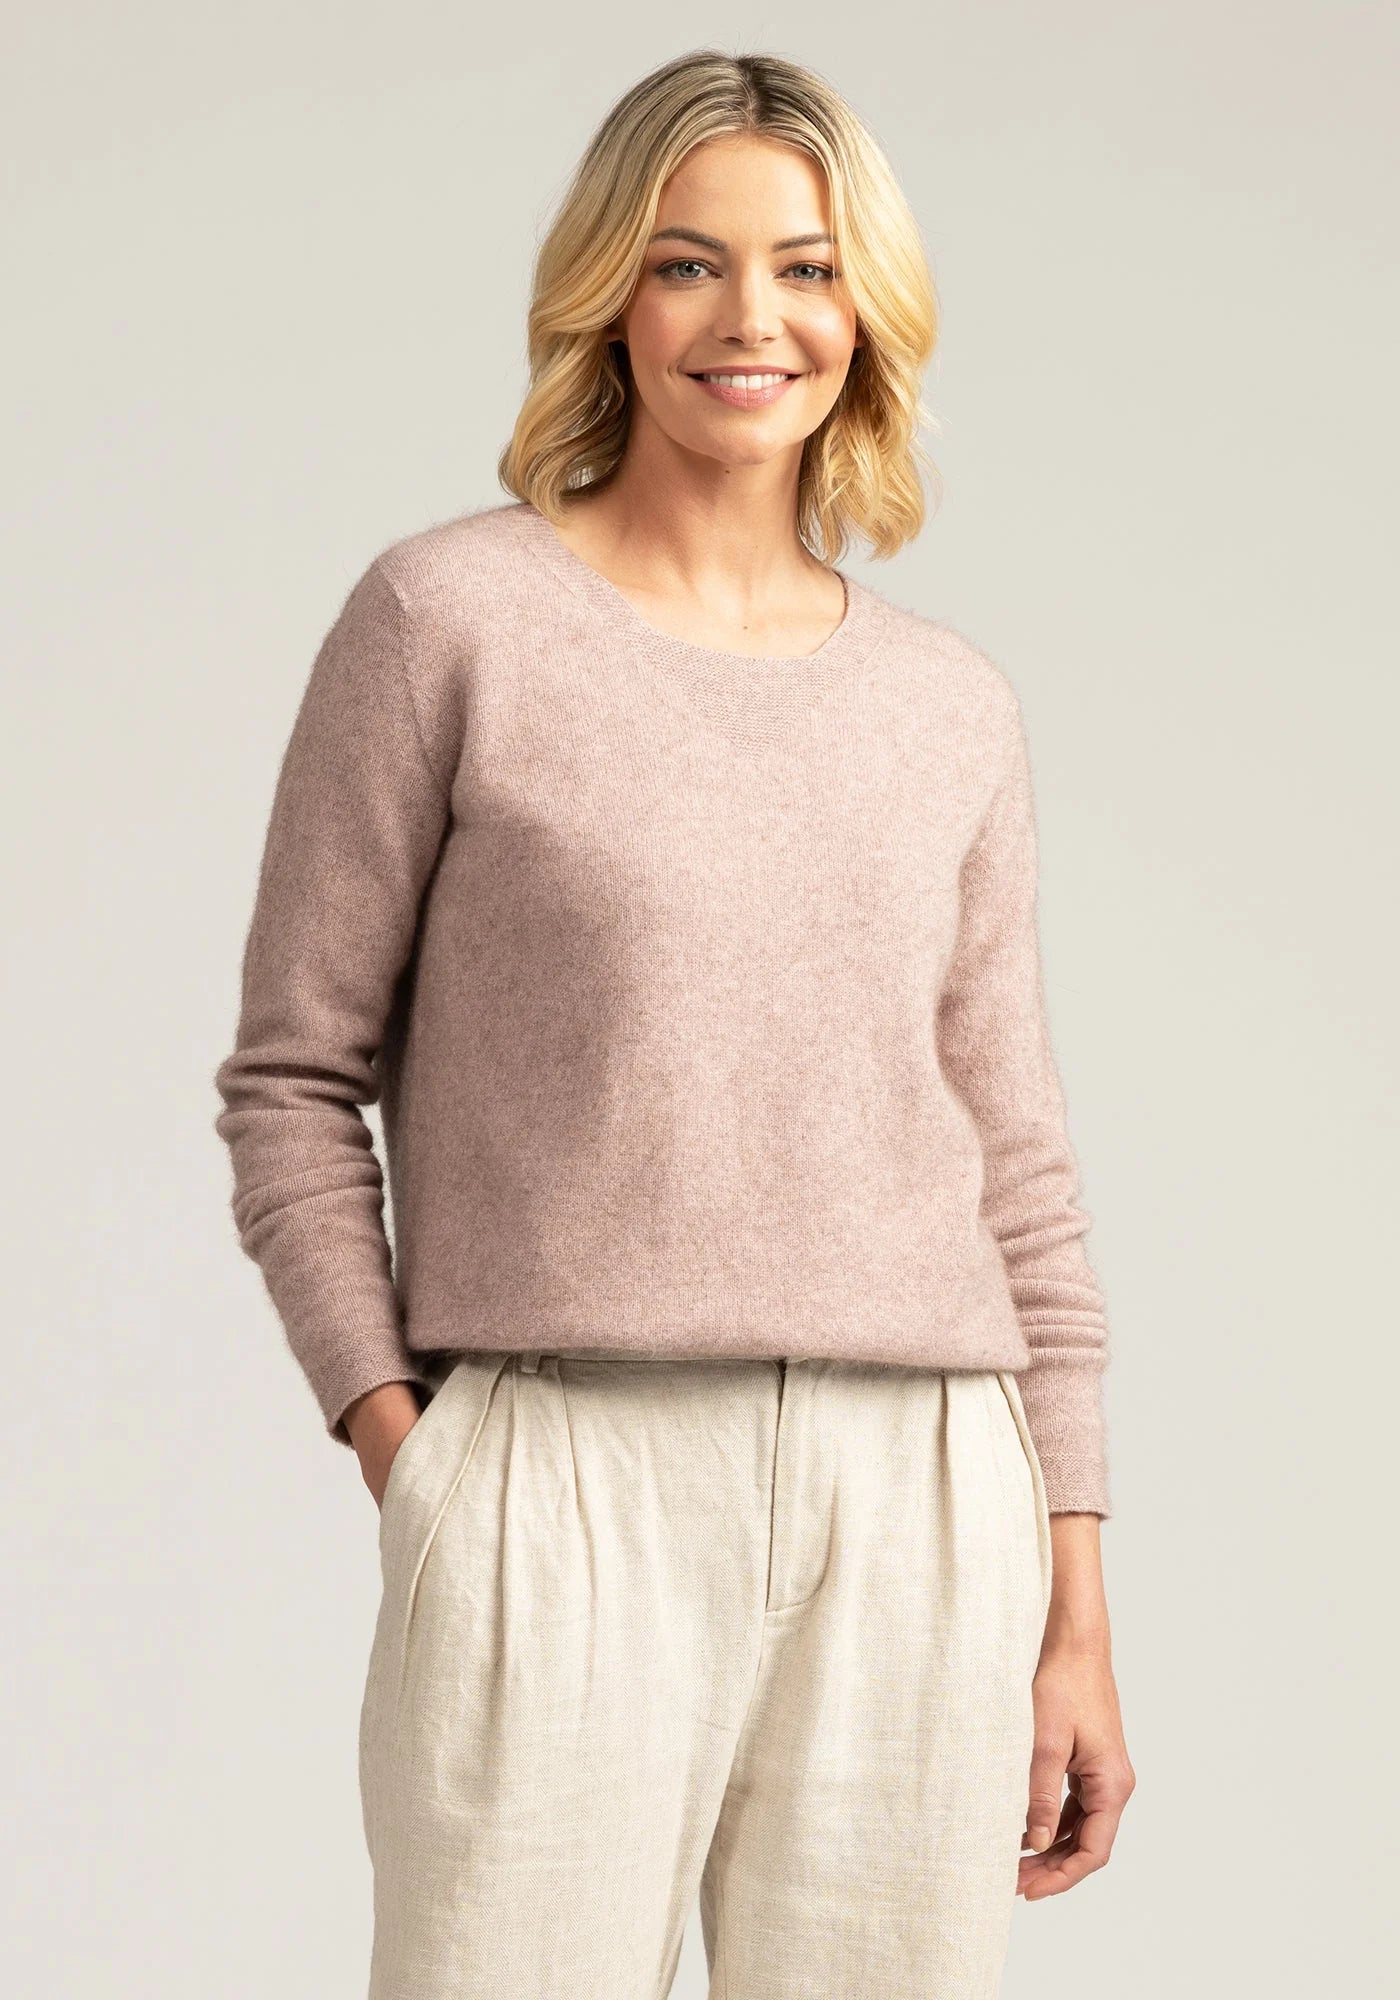 "Experience bliss in blush pink with our merino wool sweater. Your perfect blend of comfort and style."